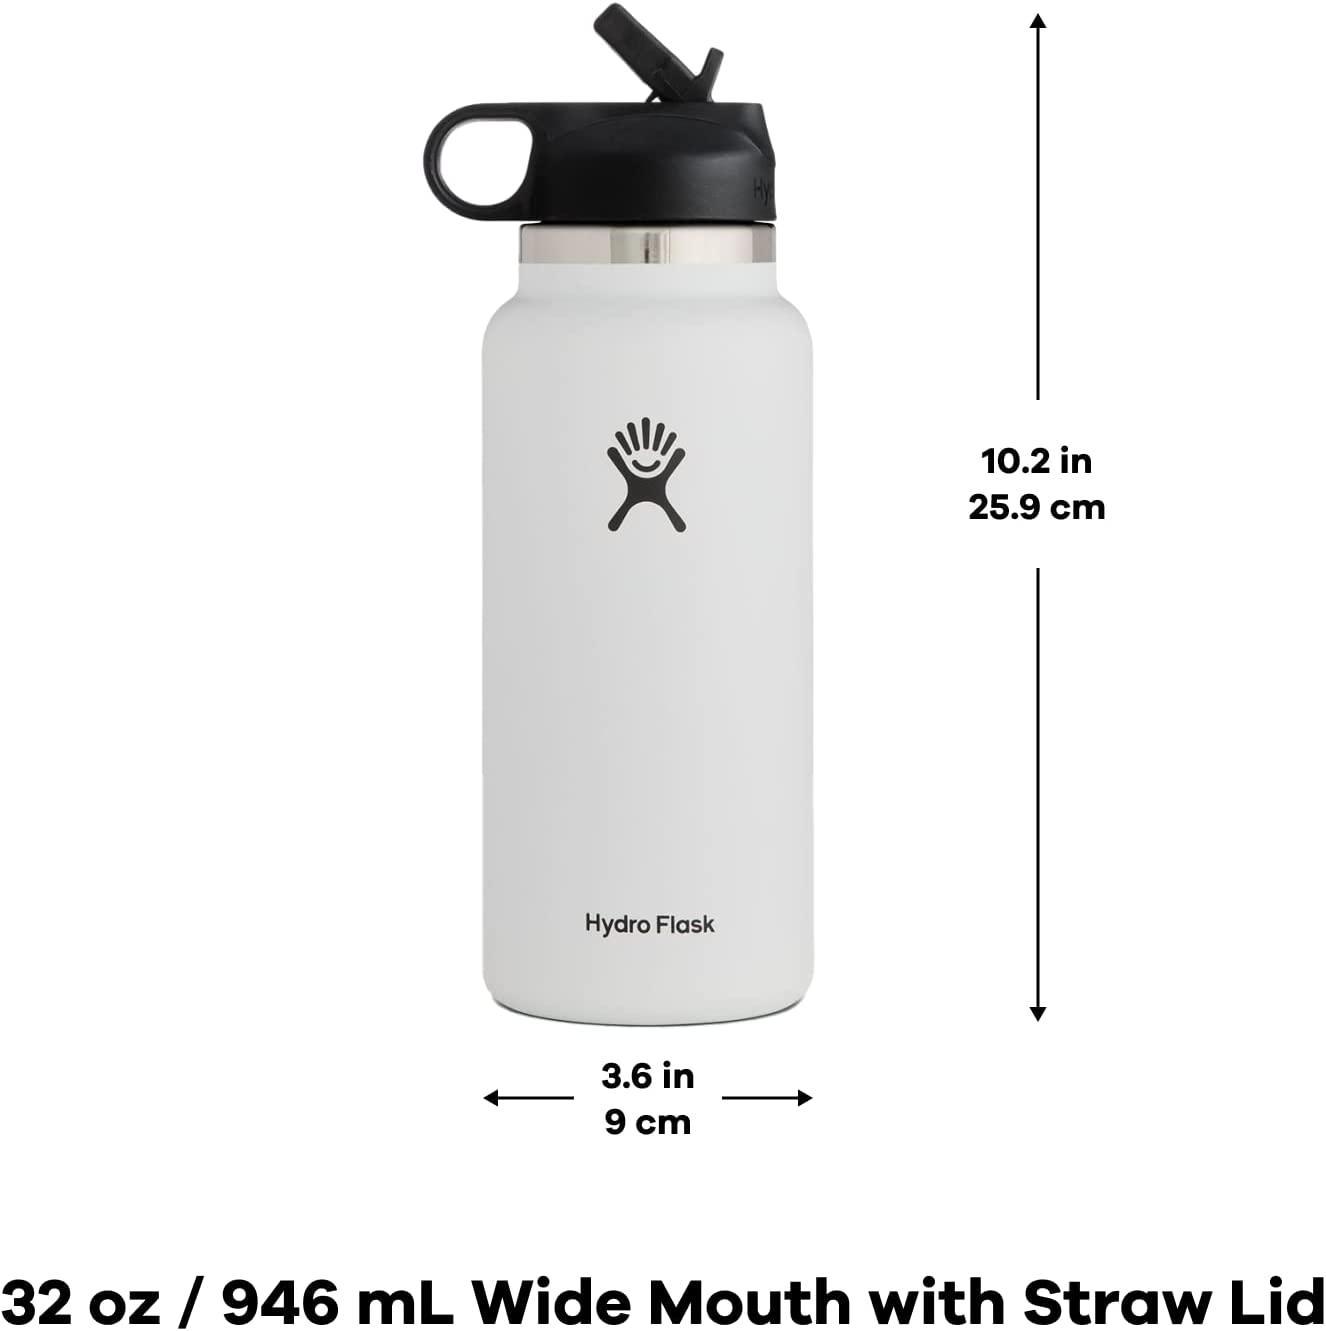 https://discounttoday.net/wp-content/uploads/2022/09/1Hydro-Flask-Wide-Mouth-Straw-Lid-Stainless-Steel-Reusable-Water-Bottle-Vacuum-Insulated.jpg